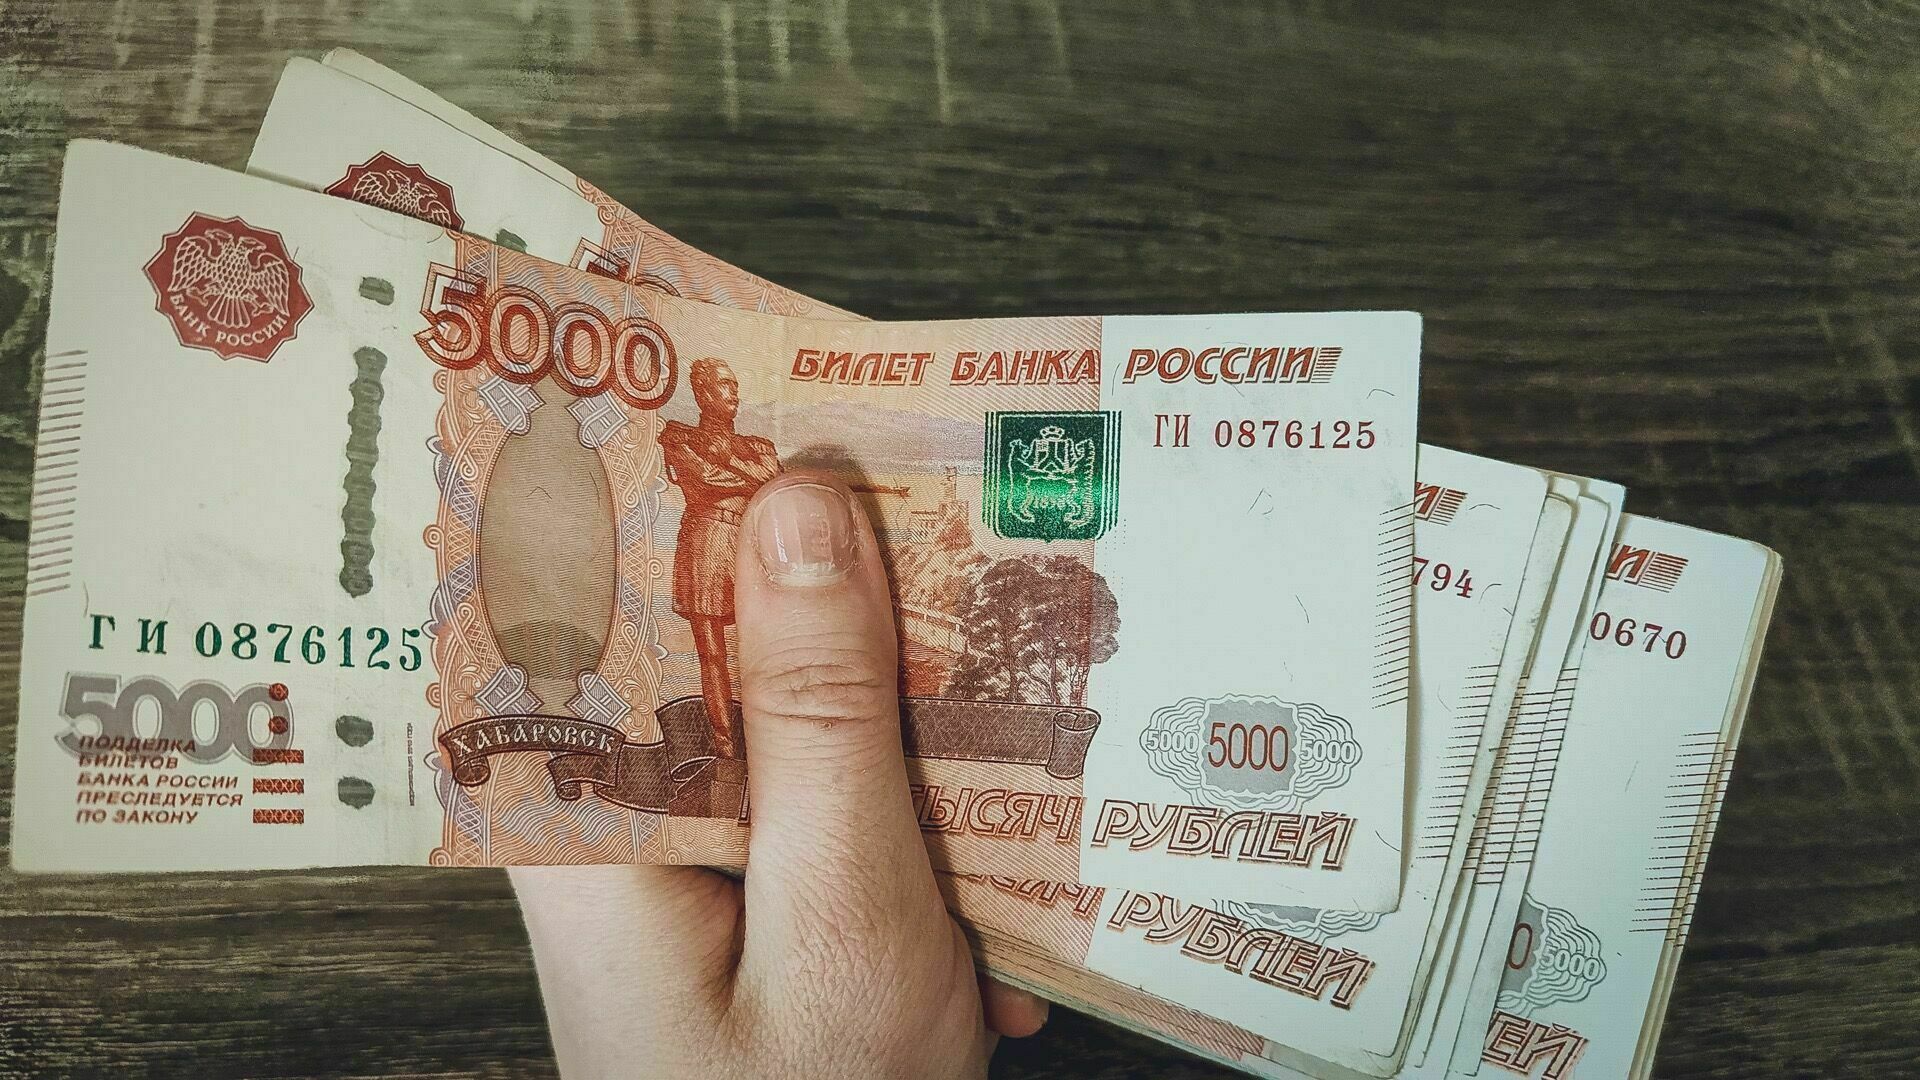 A dollar for 200 rubles: a horror story or reality?